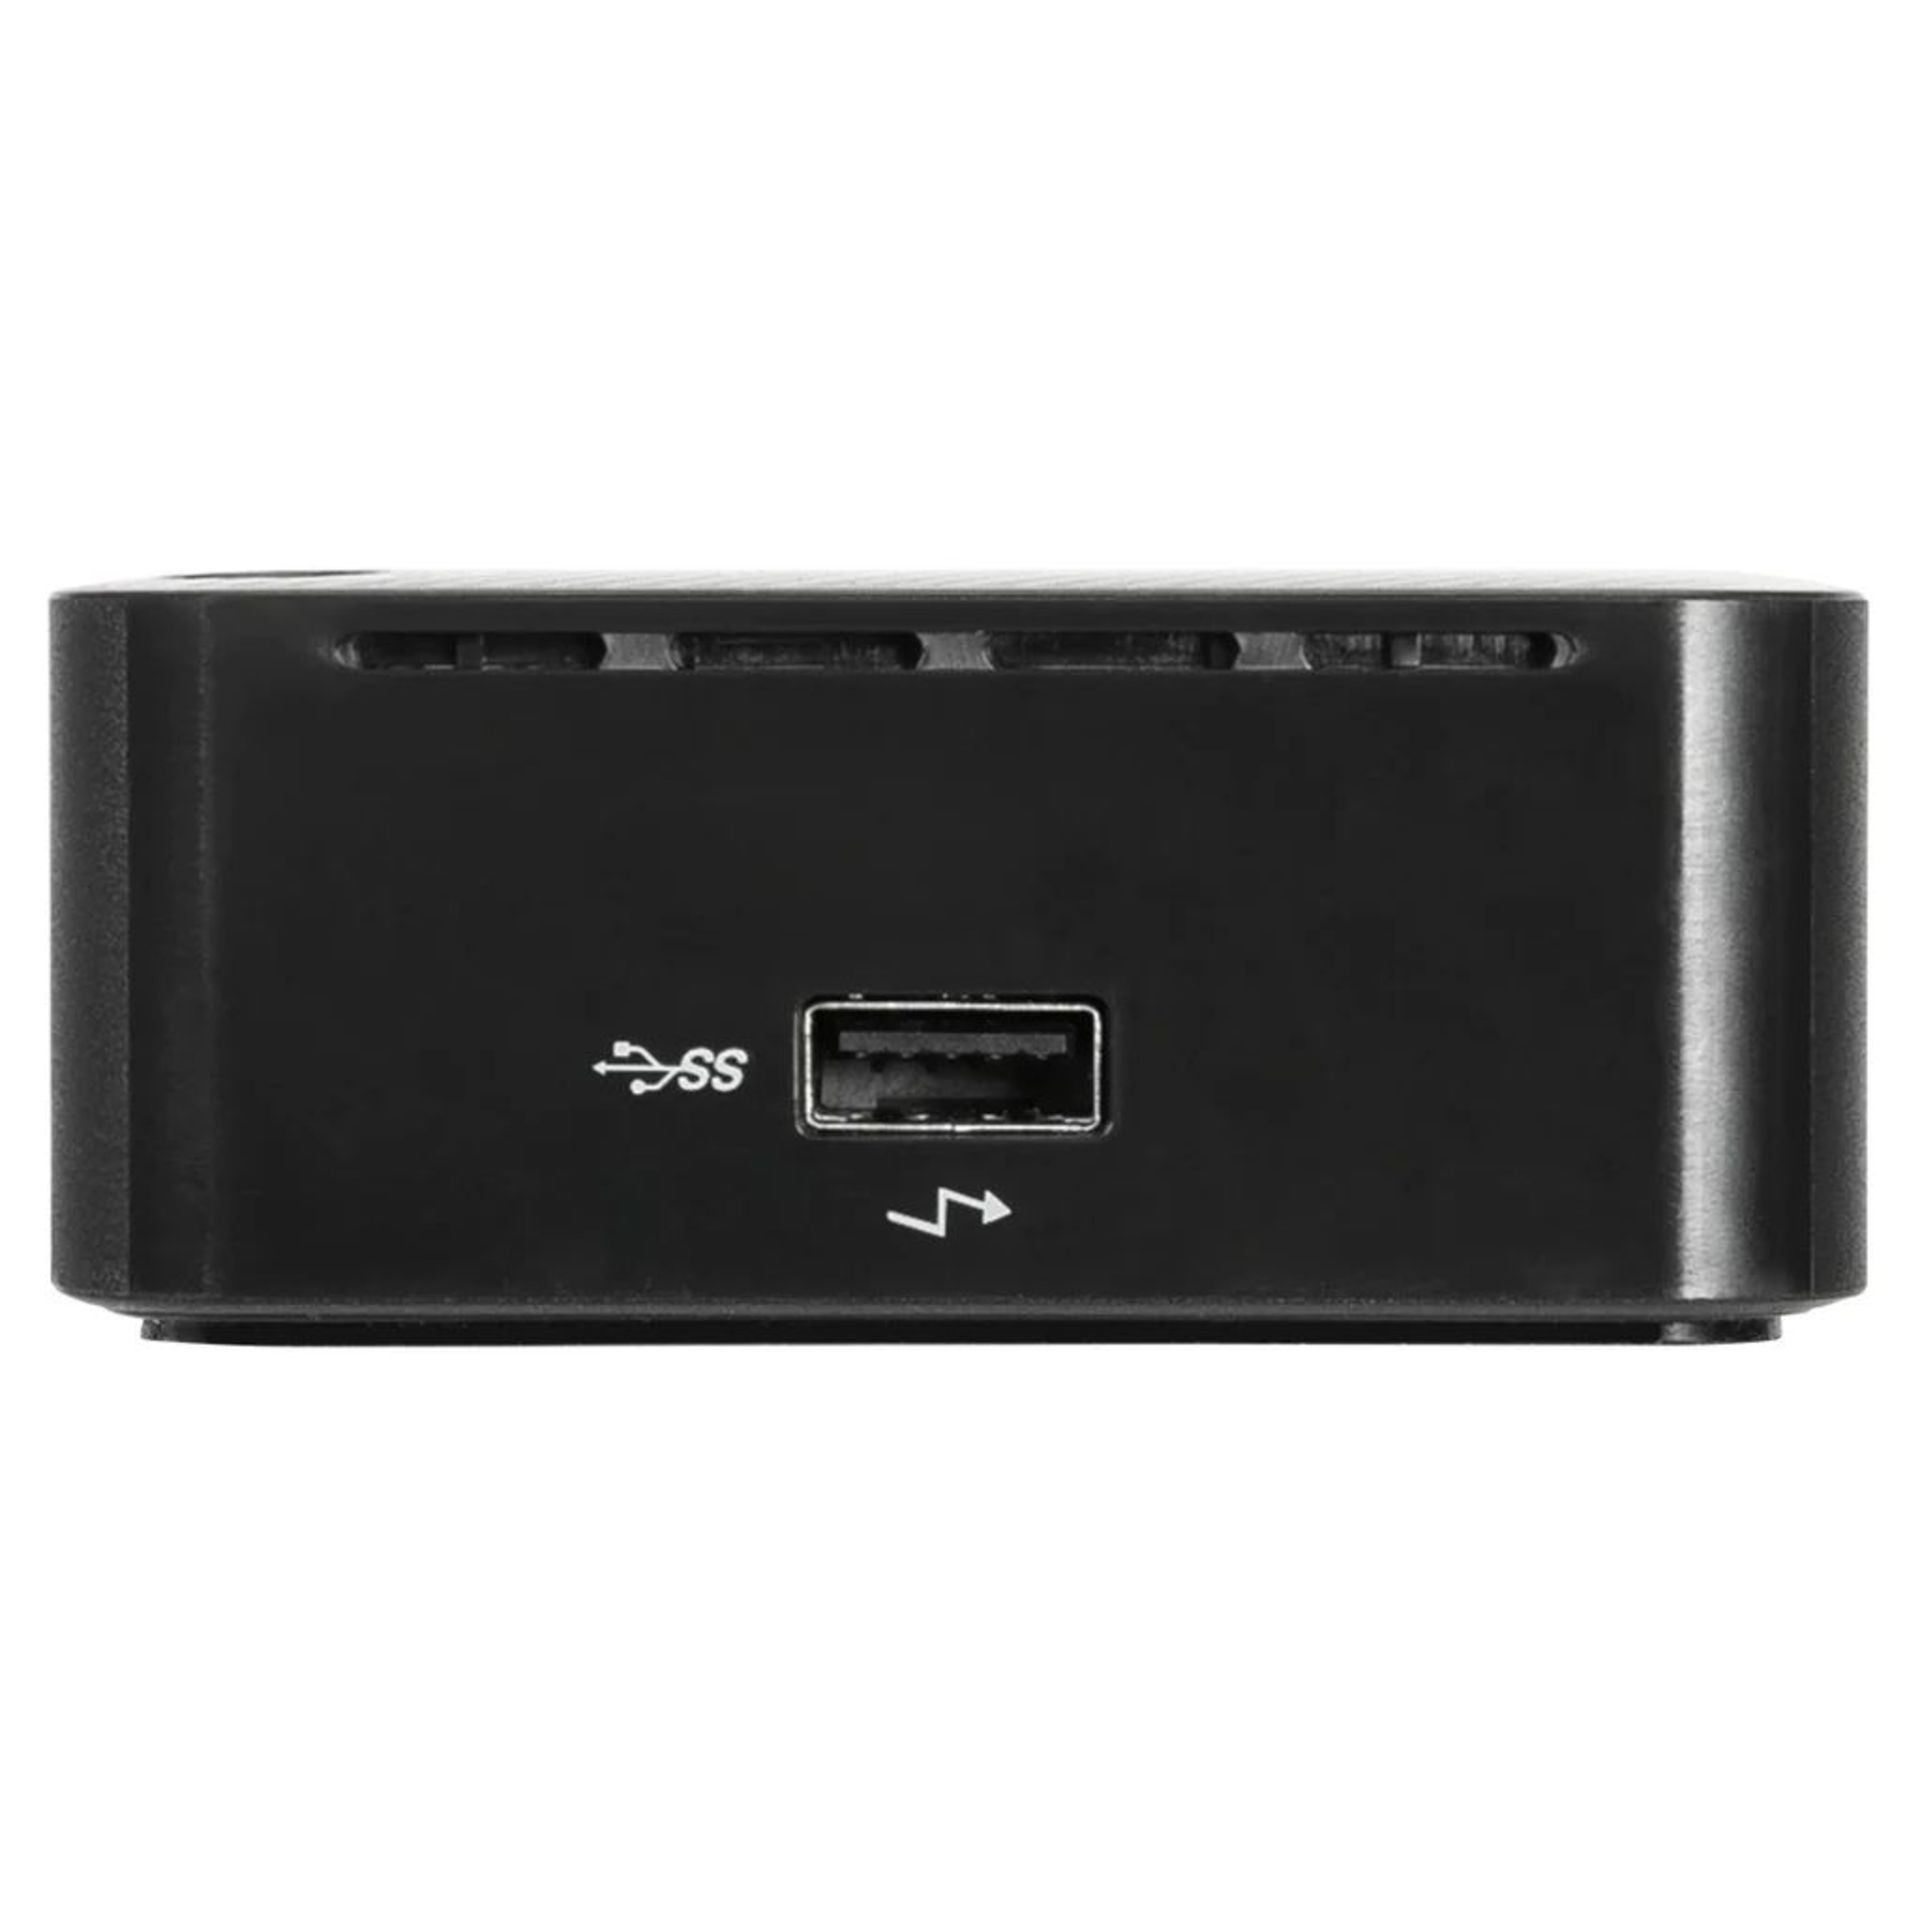 NEW & BOXED TARGUS DOCK182-Q2 USB-C Universal DV4K Docking Station with 100W Power Delivery. RRP £ - Image 3 of 9